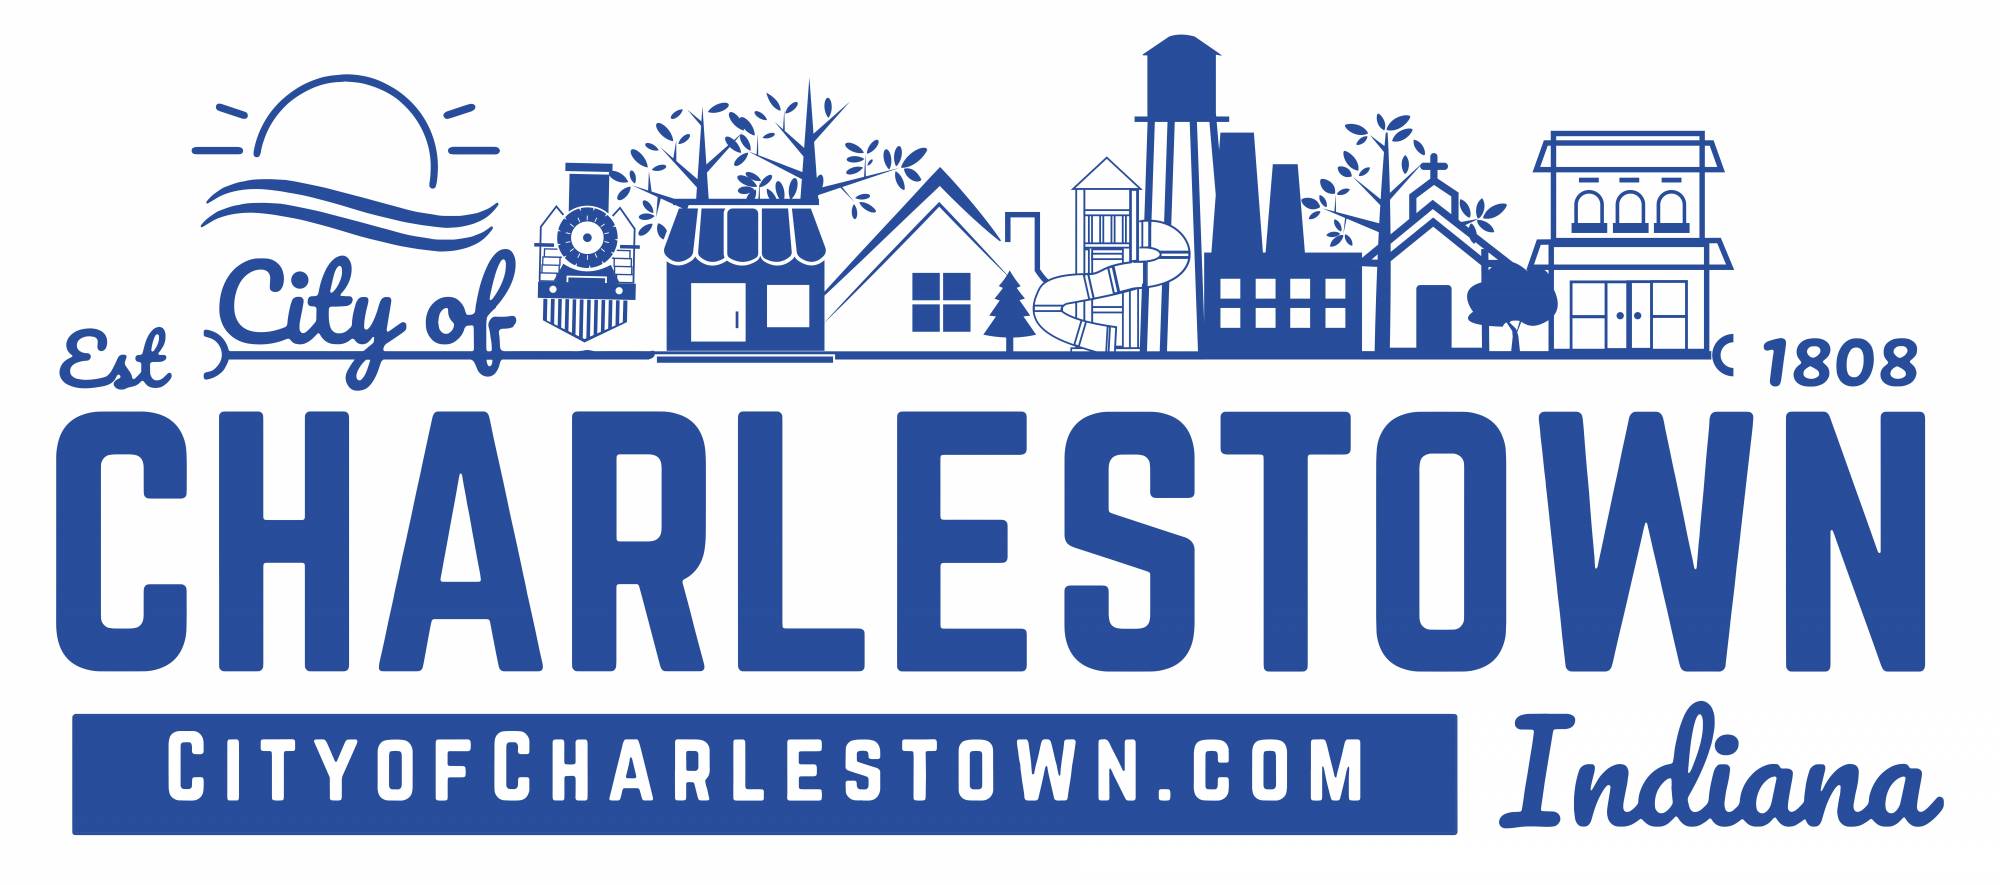 In photo is logo for The City of Charlestown, in Indiana. It includes a colorful drawing of homes and businesses.